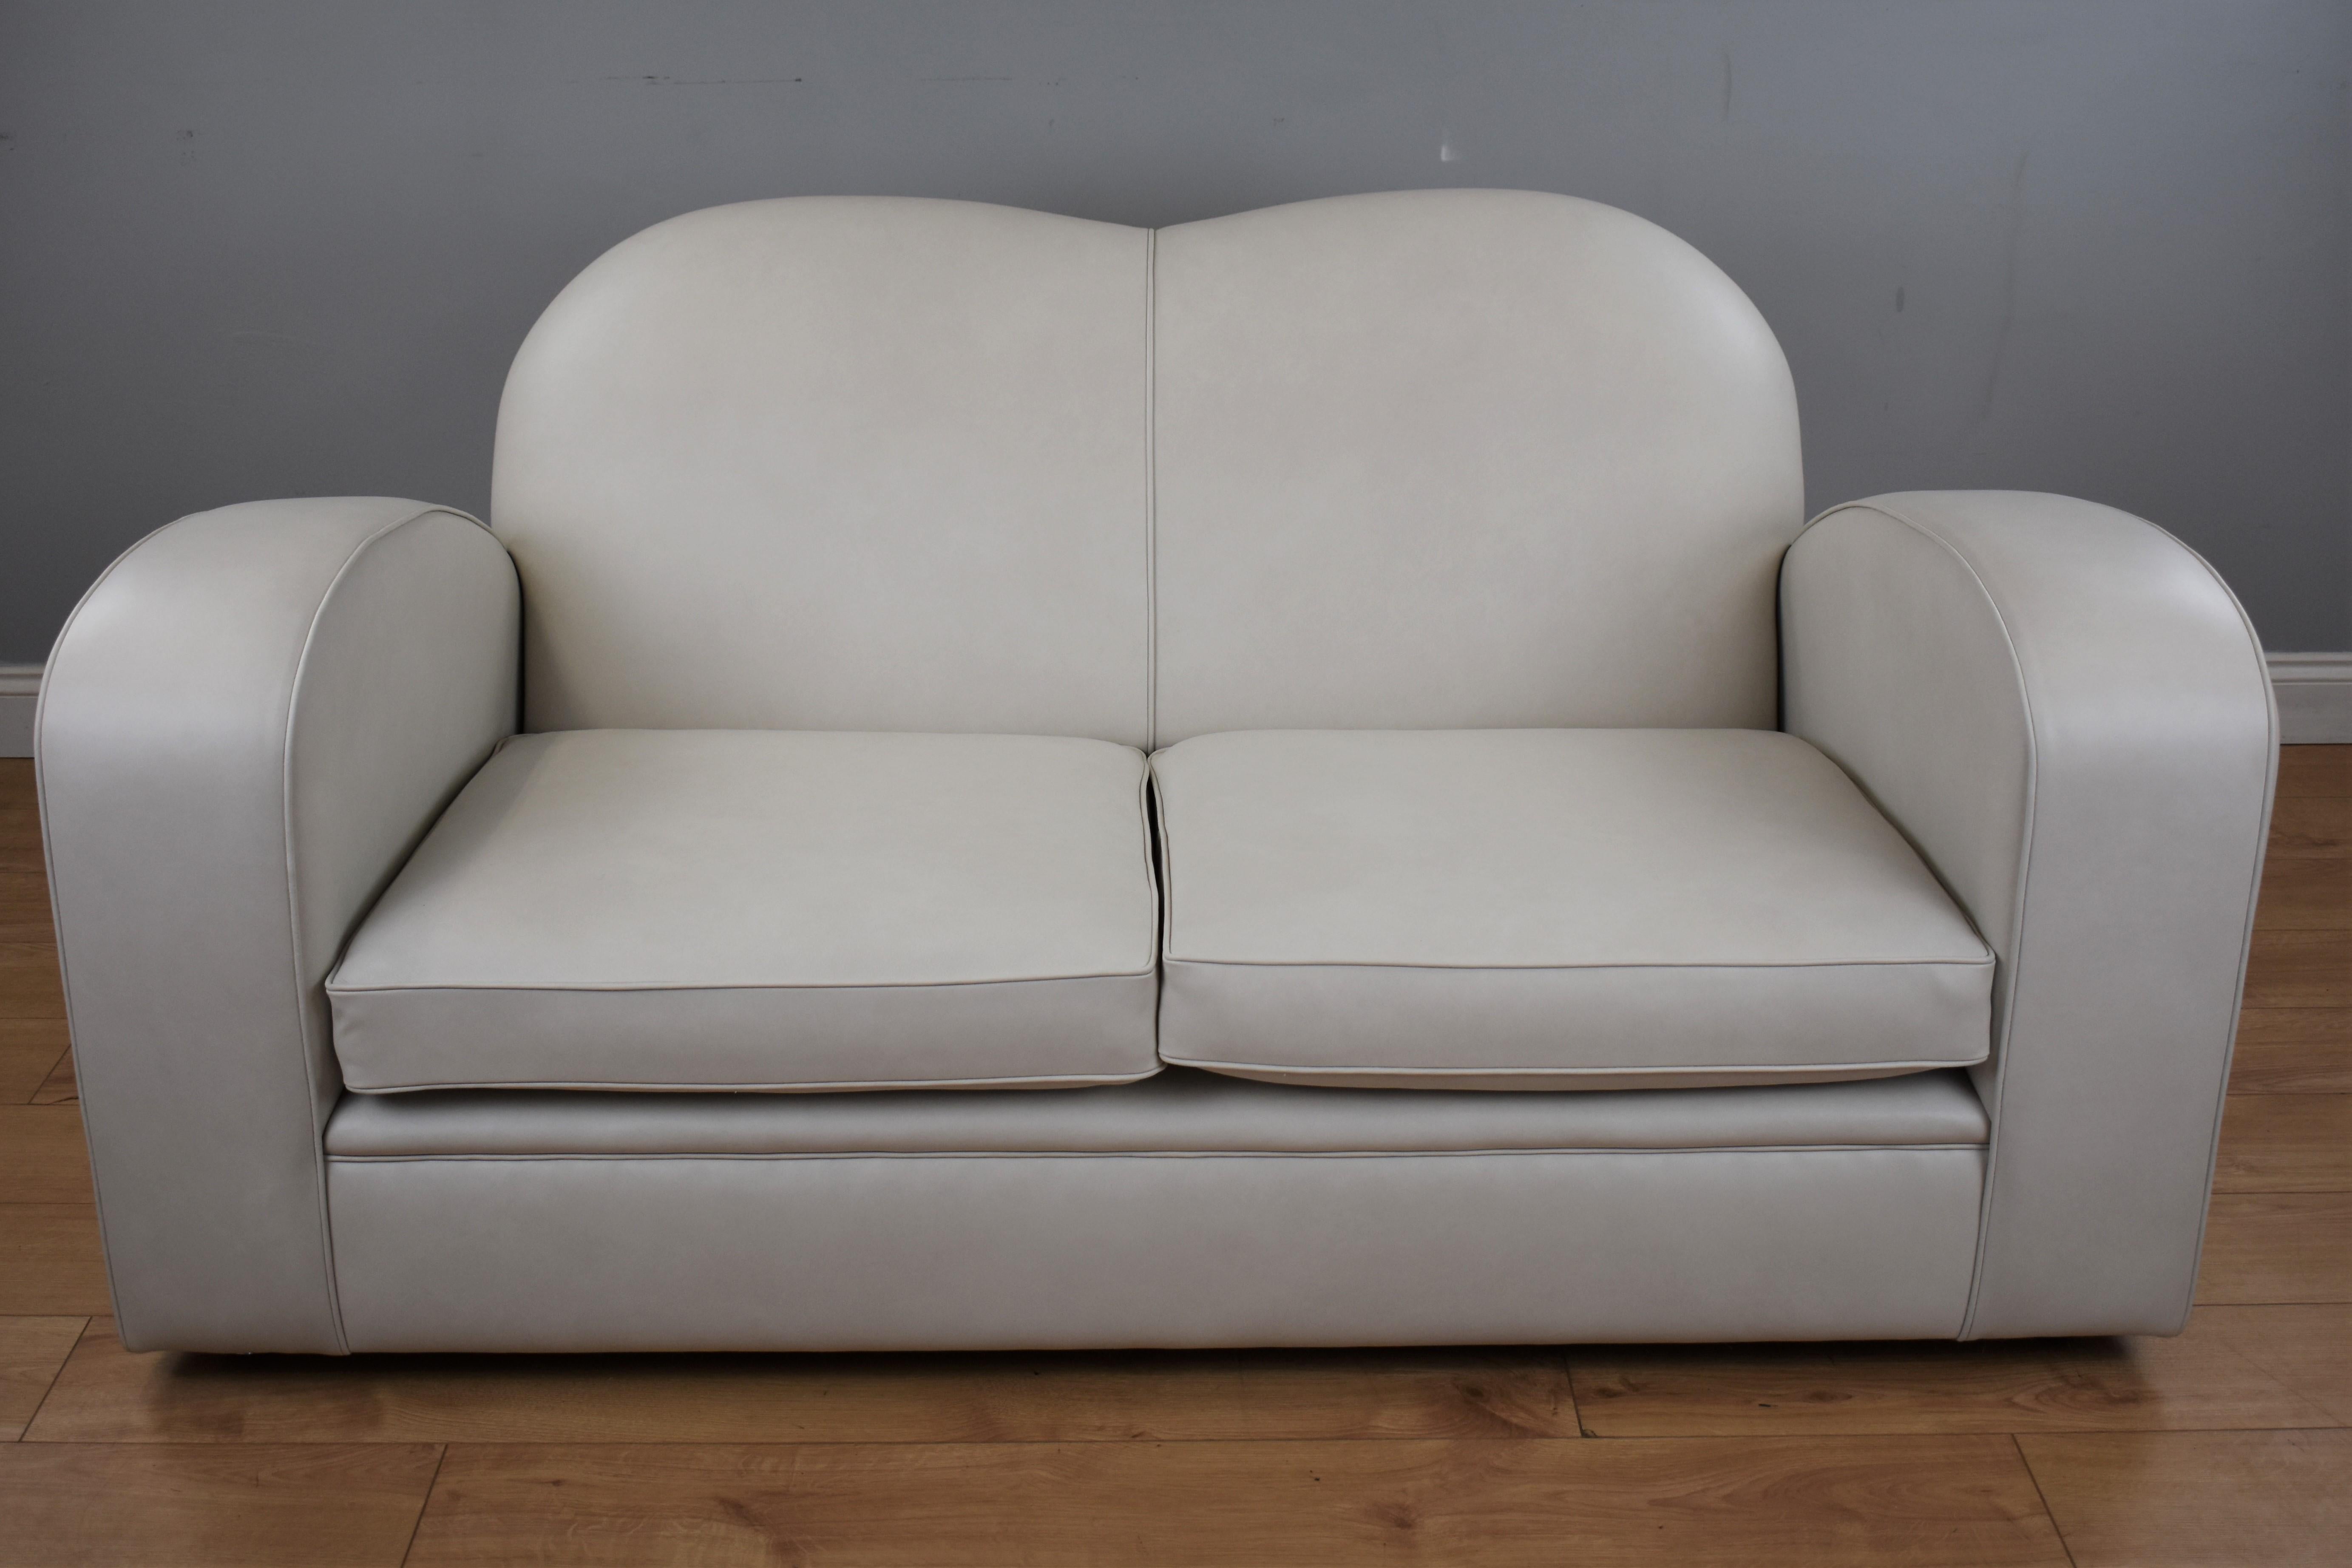 Art Deco two-seat sofa upholstered in a frost grey leather with matching piping to the edge.